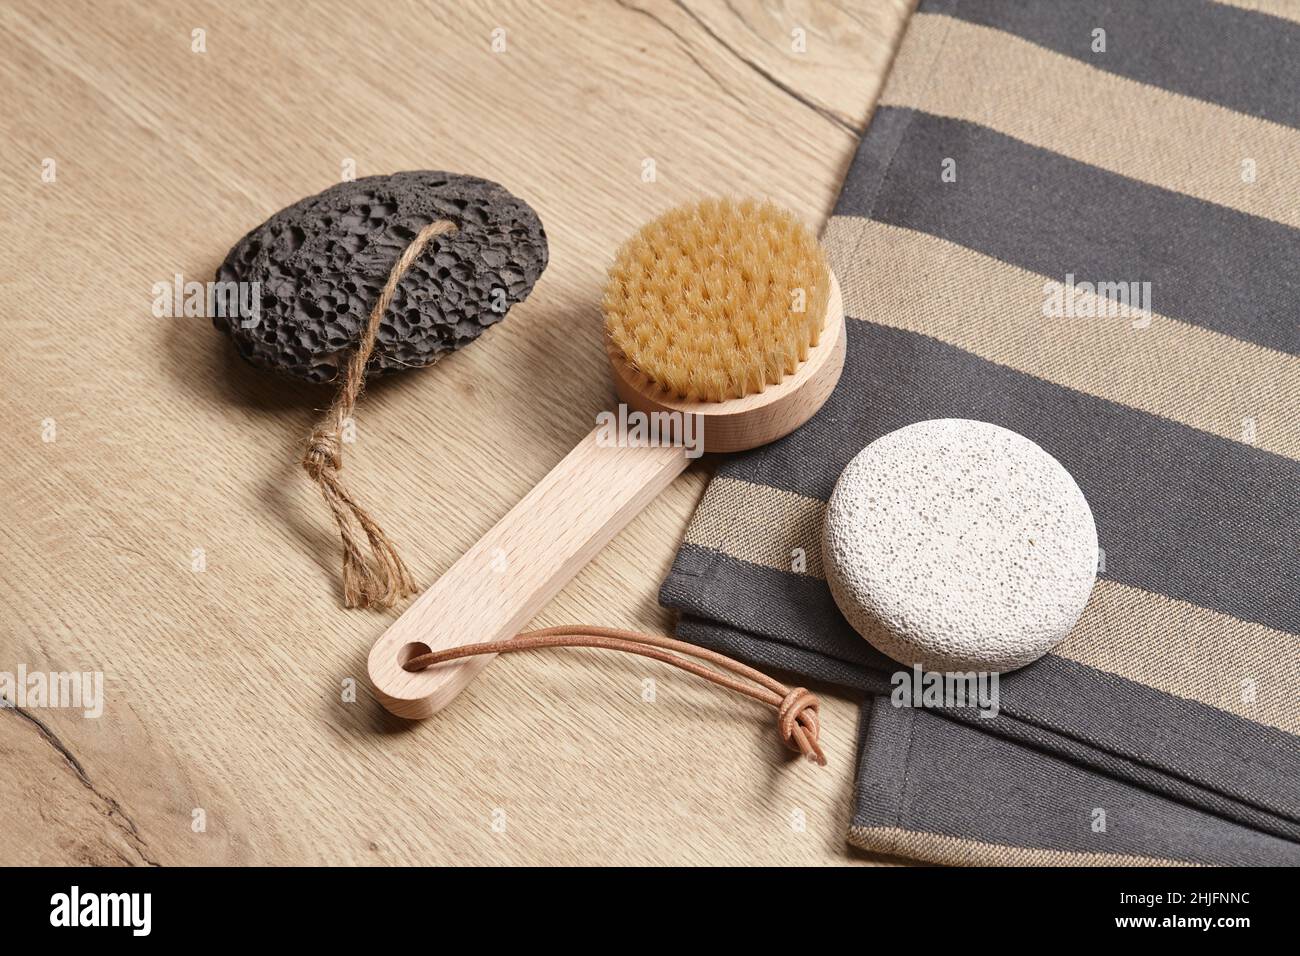 Wooden brush and pumice stones on wooden background Stock Photo